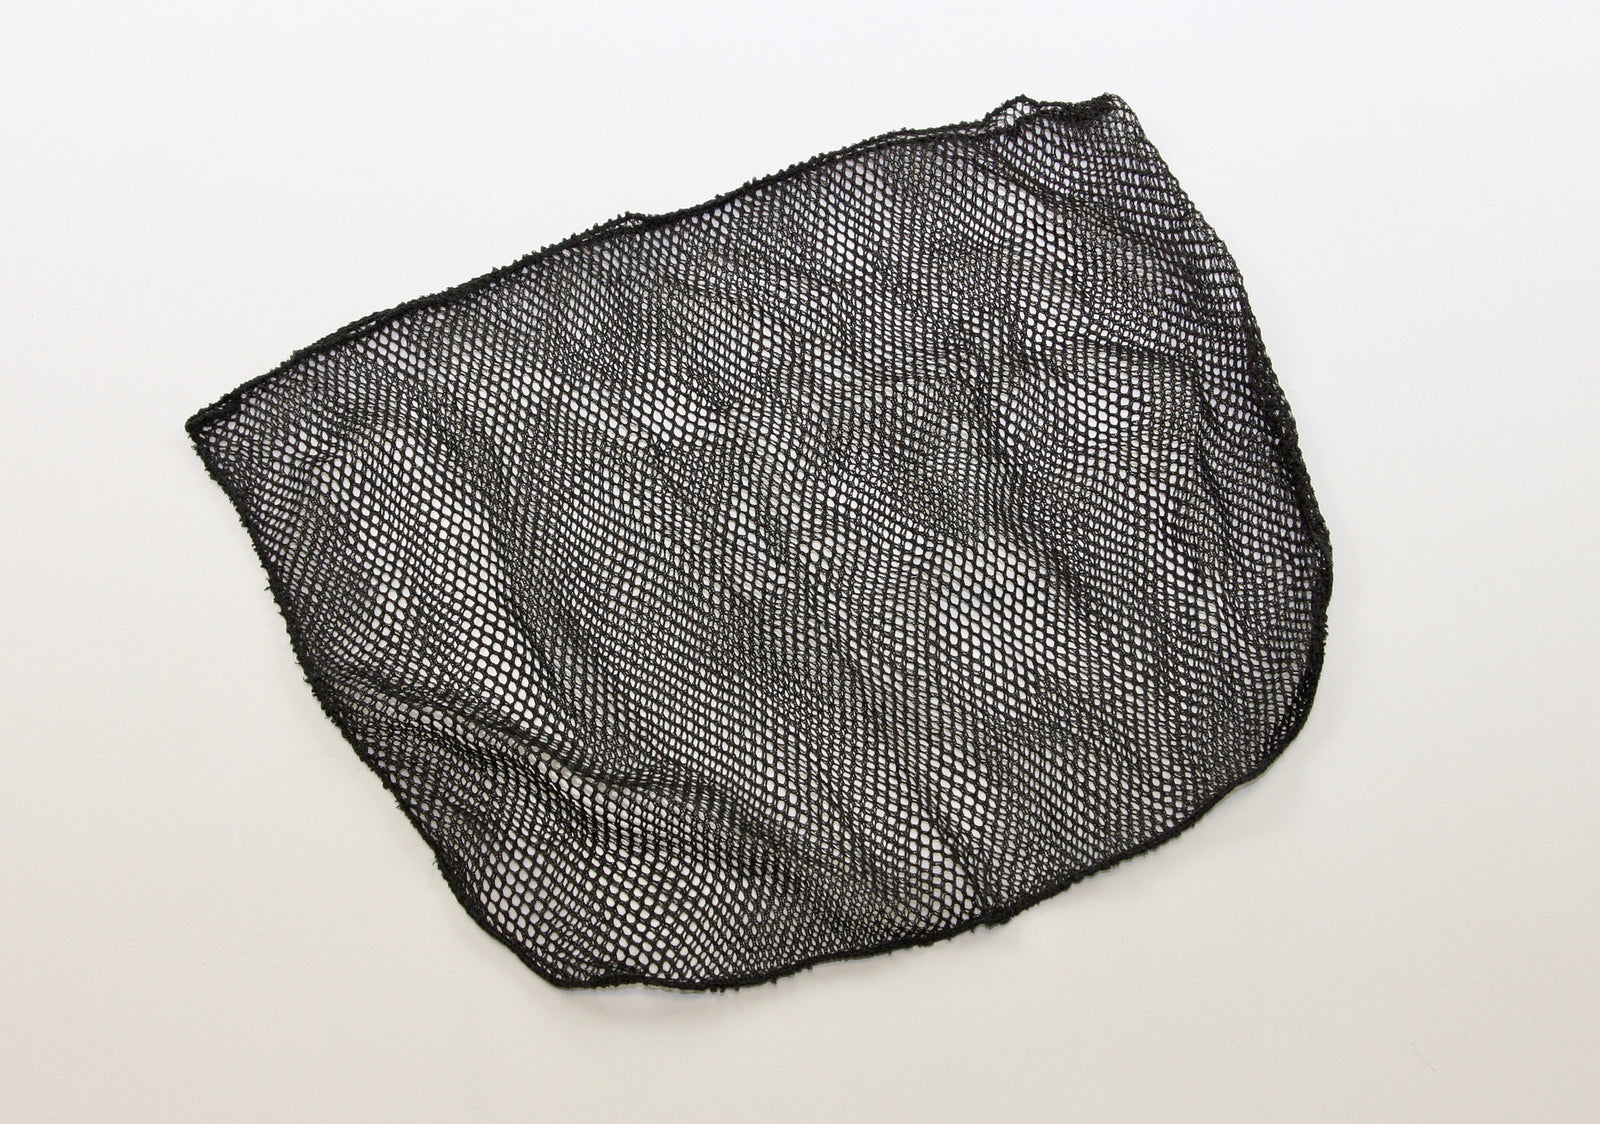 Best Selling Products - Nets that Honor the Fish